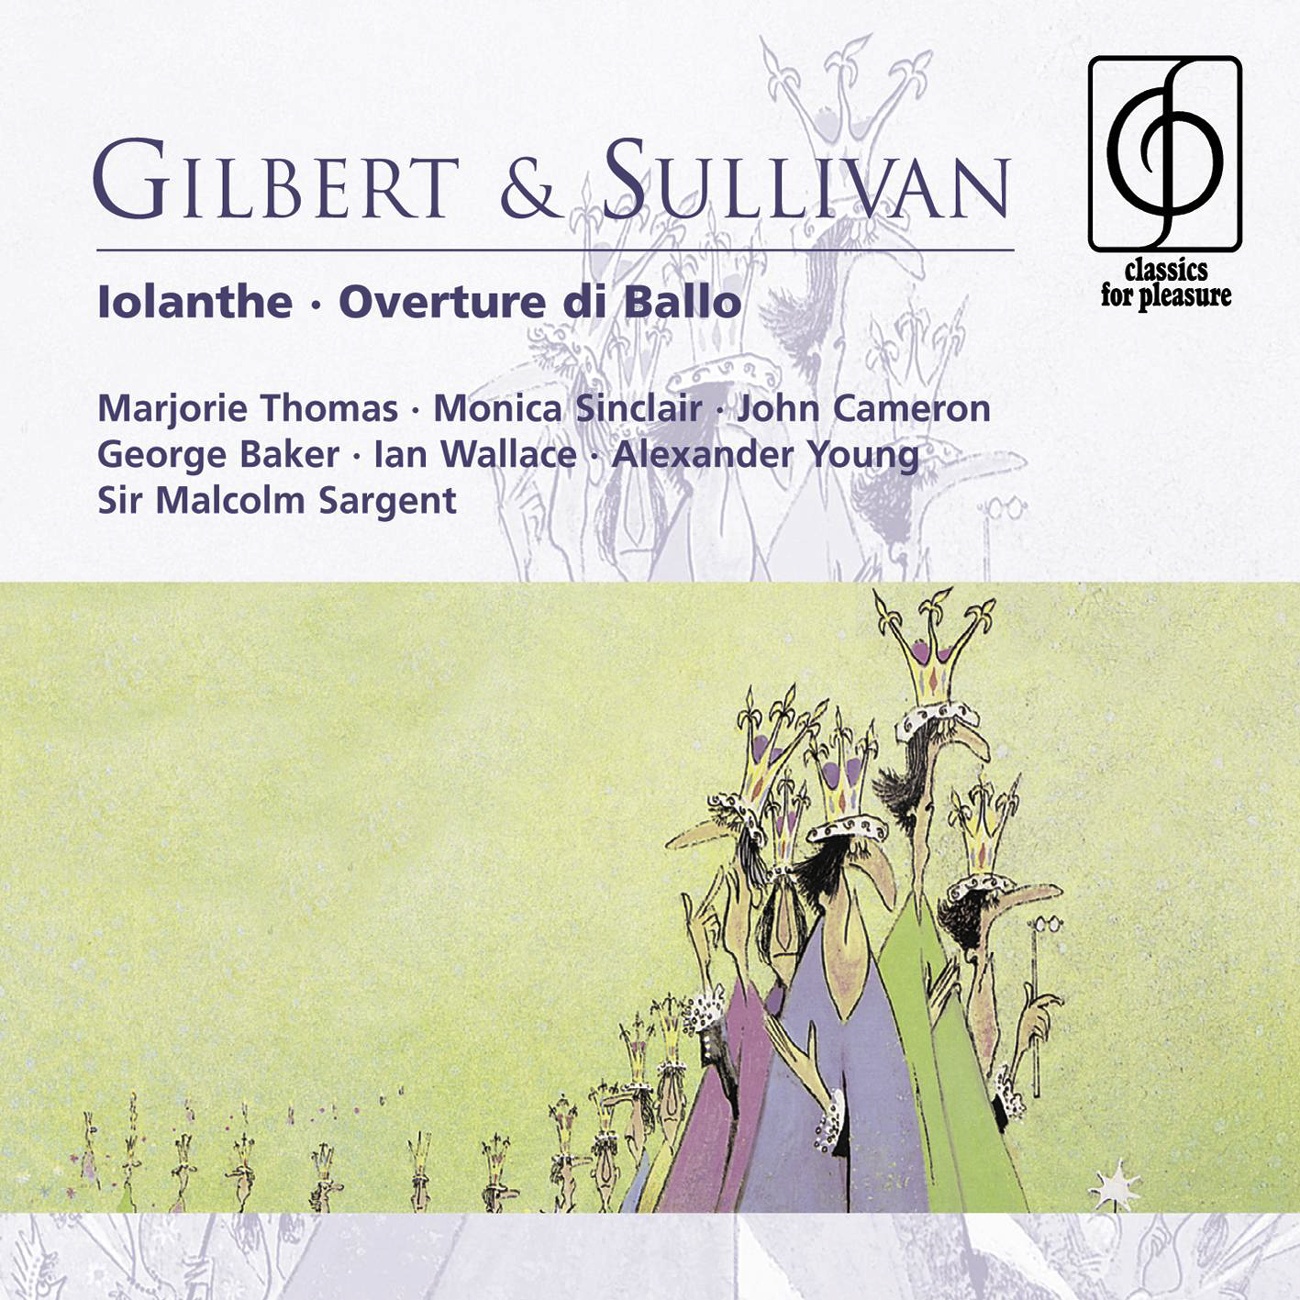 Iolanthe (or, The Peer and the Peri): Overture